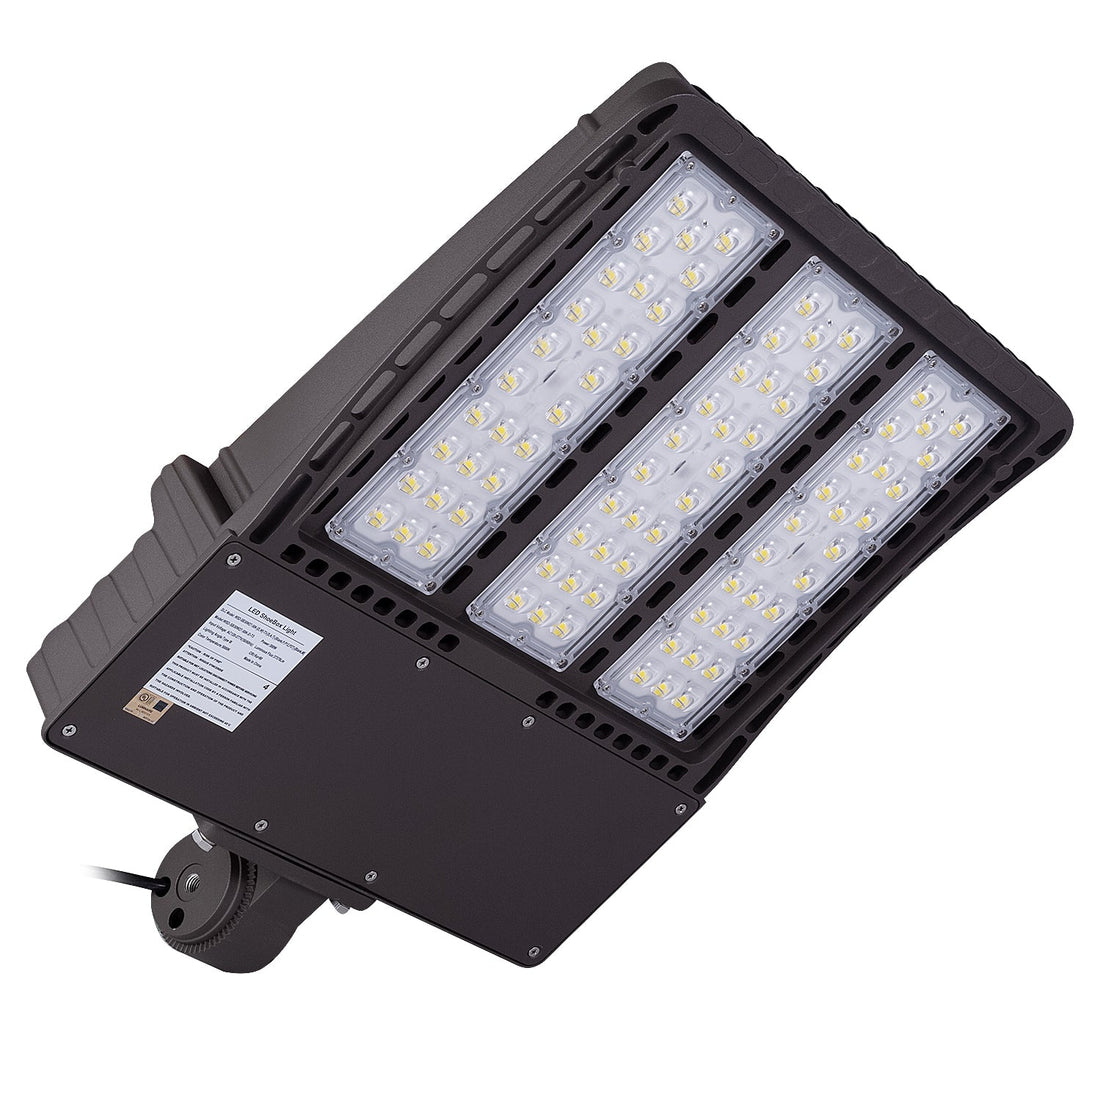 LED Shoebox Light with 300W for Outdoor Street Area Lighting, 5000K, Direct Mount , 42132Lumens, AC120-277V - 0-10V Dimmable - IP66 - UL Listed - DLC Premium Listed - 5 Years Warranty Success